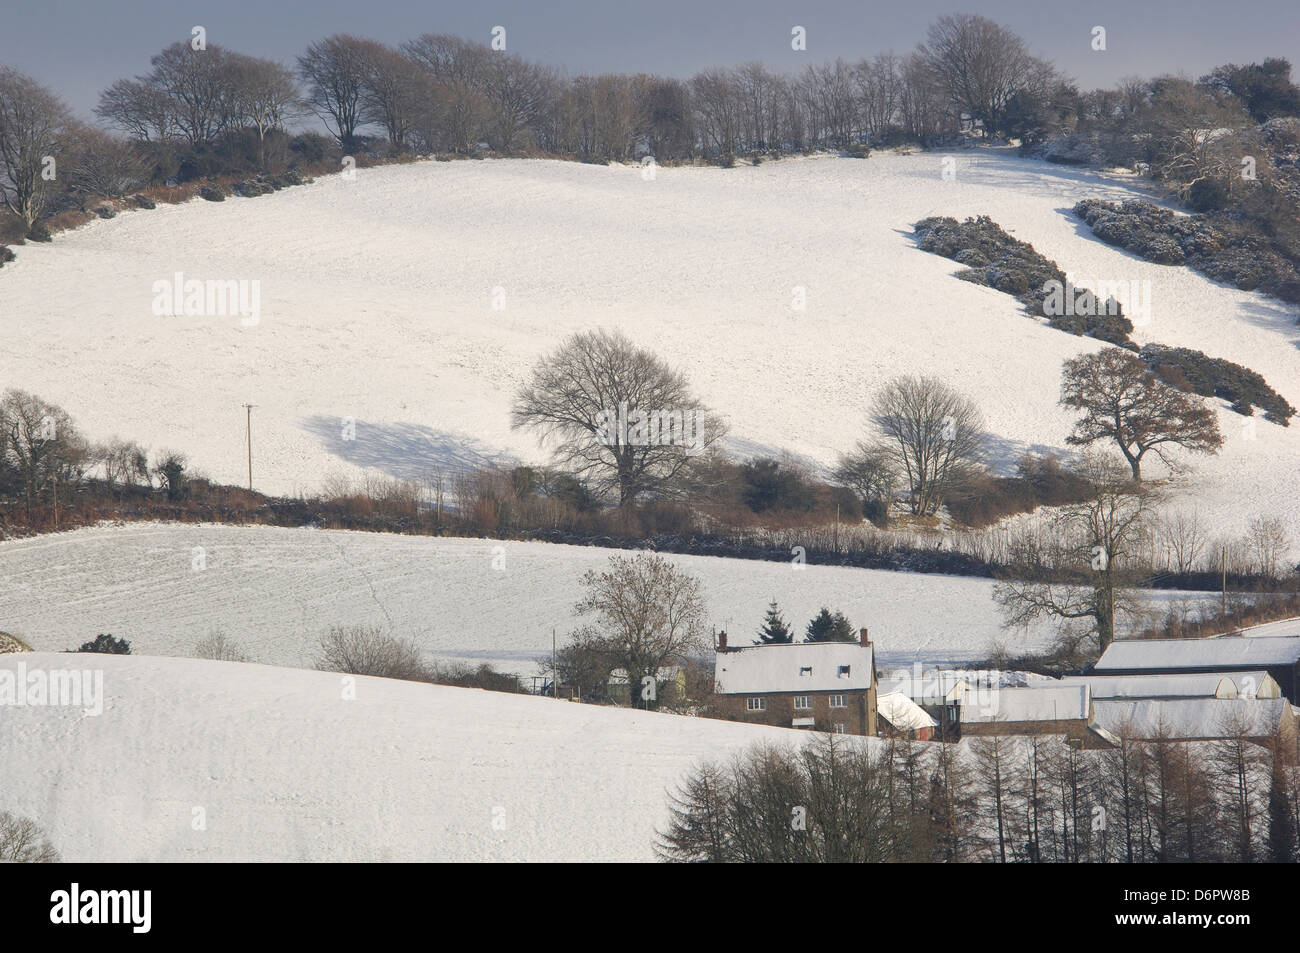 A view of snow covered hills in Dorset UK Stock Photo